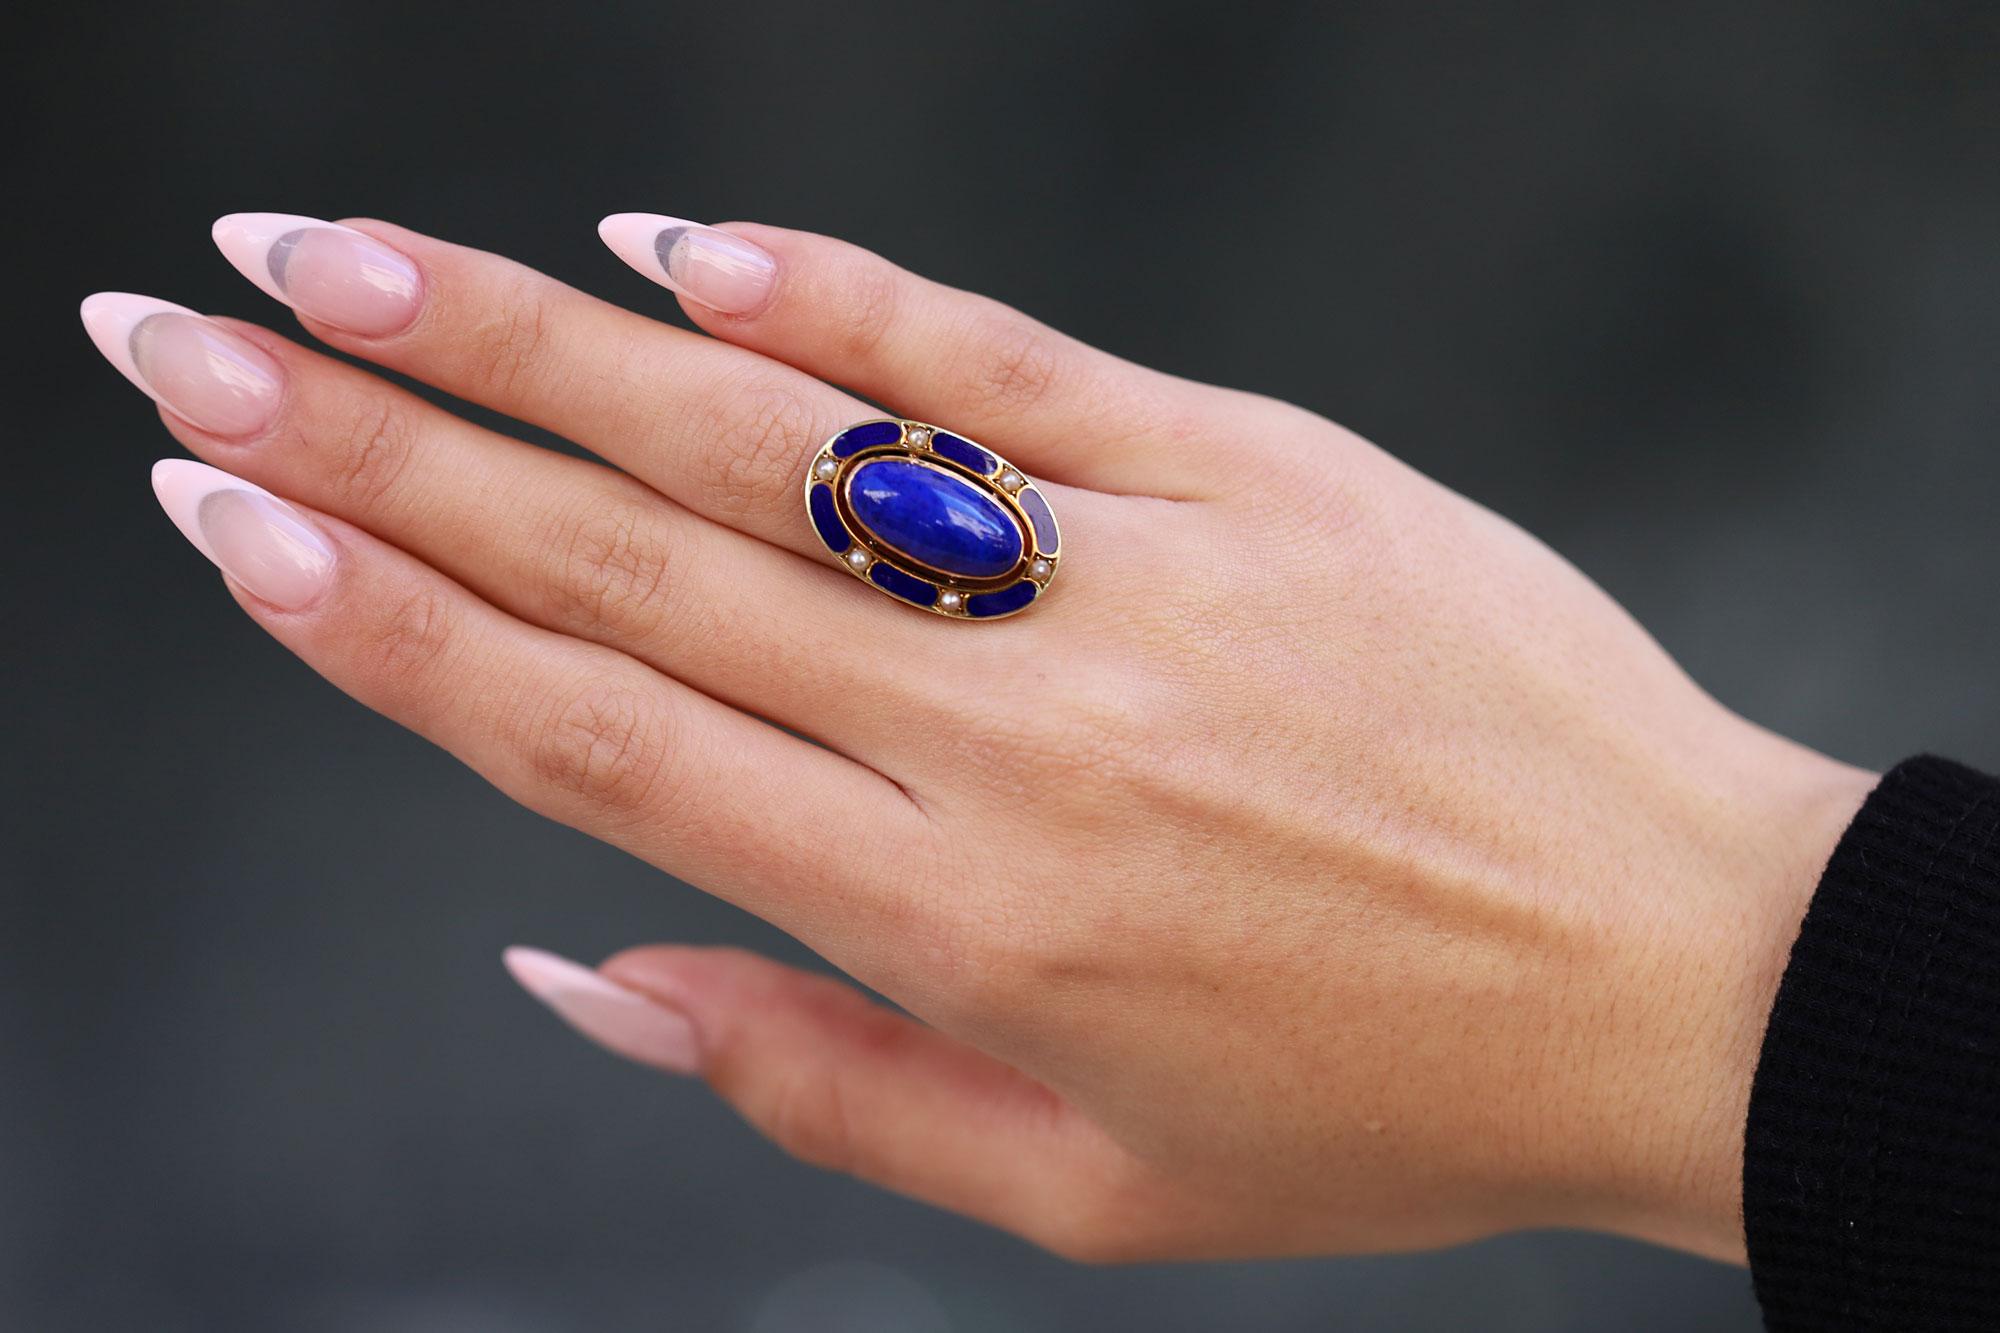 A rich, velvety blue lapis lazuli and enamel cocktail ring providing outstanding finger coverage and a unique silhouette, dating from the Art Nouveau/Art Deco era. Creating a harmonious symphony composed as an elongated ellipse, offset with a